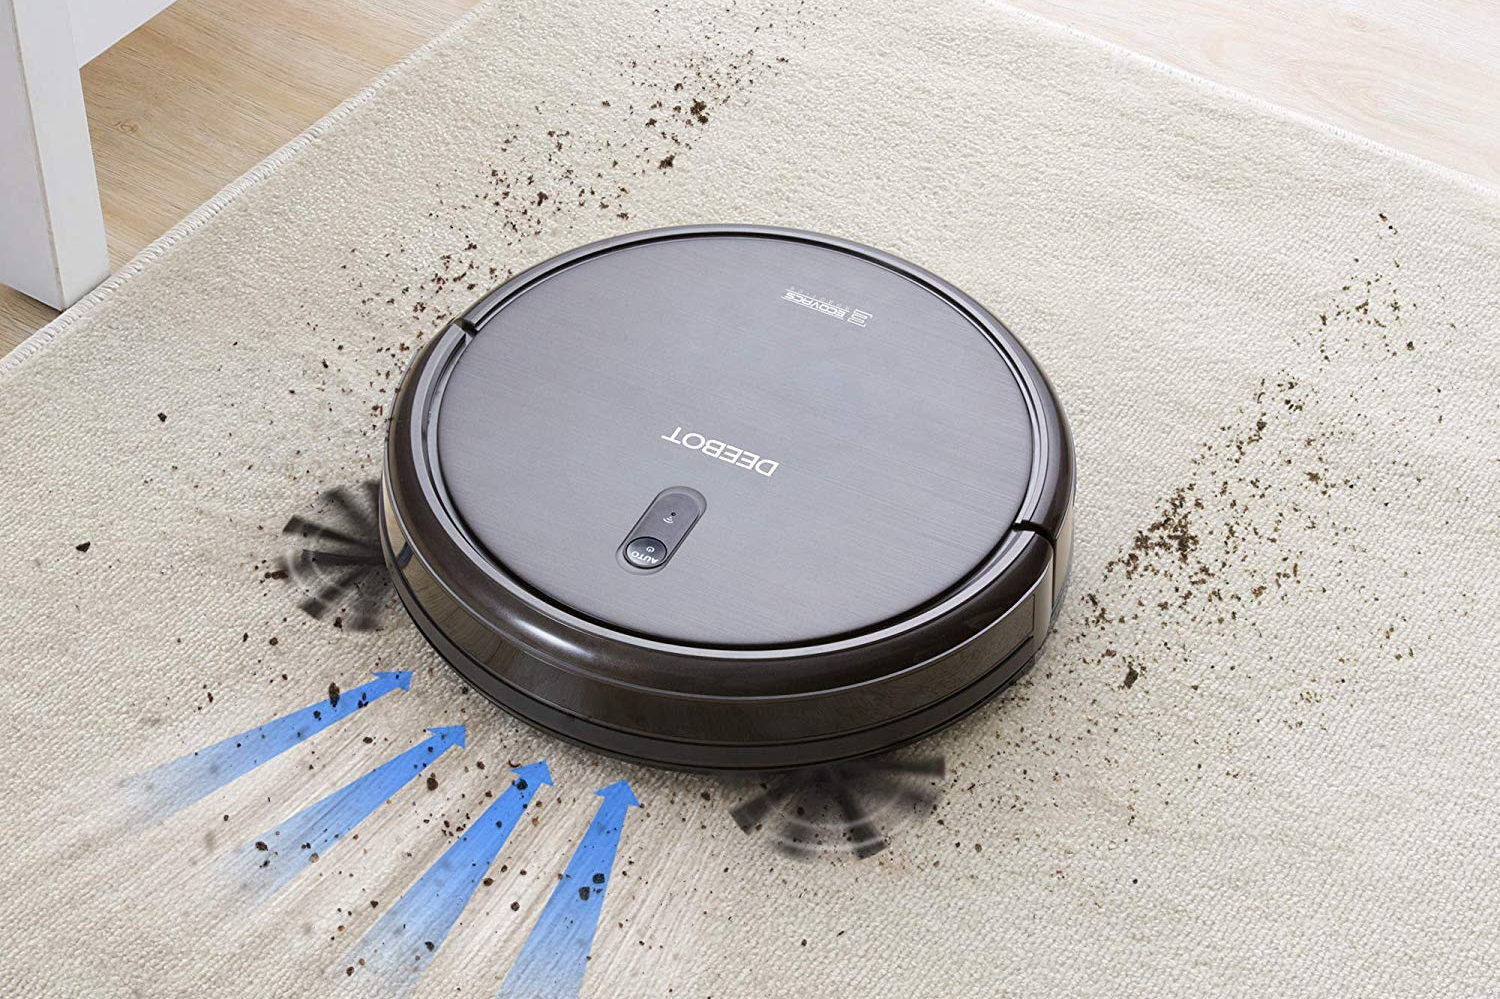 amazon 24 hour deal best price ever on ecovacs deebot n79s robot vac vacuum cleaner 2  1